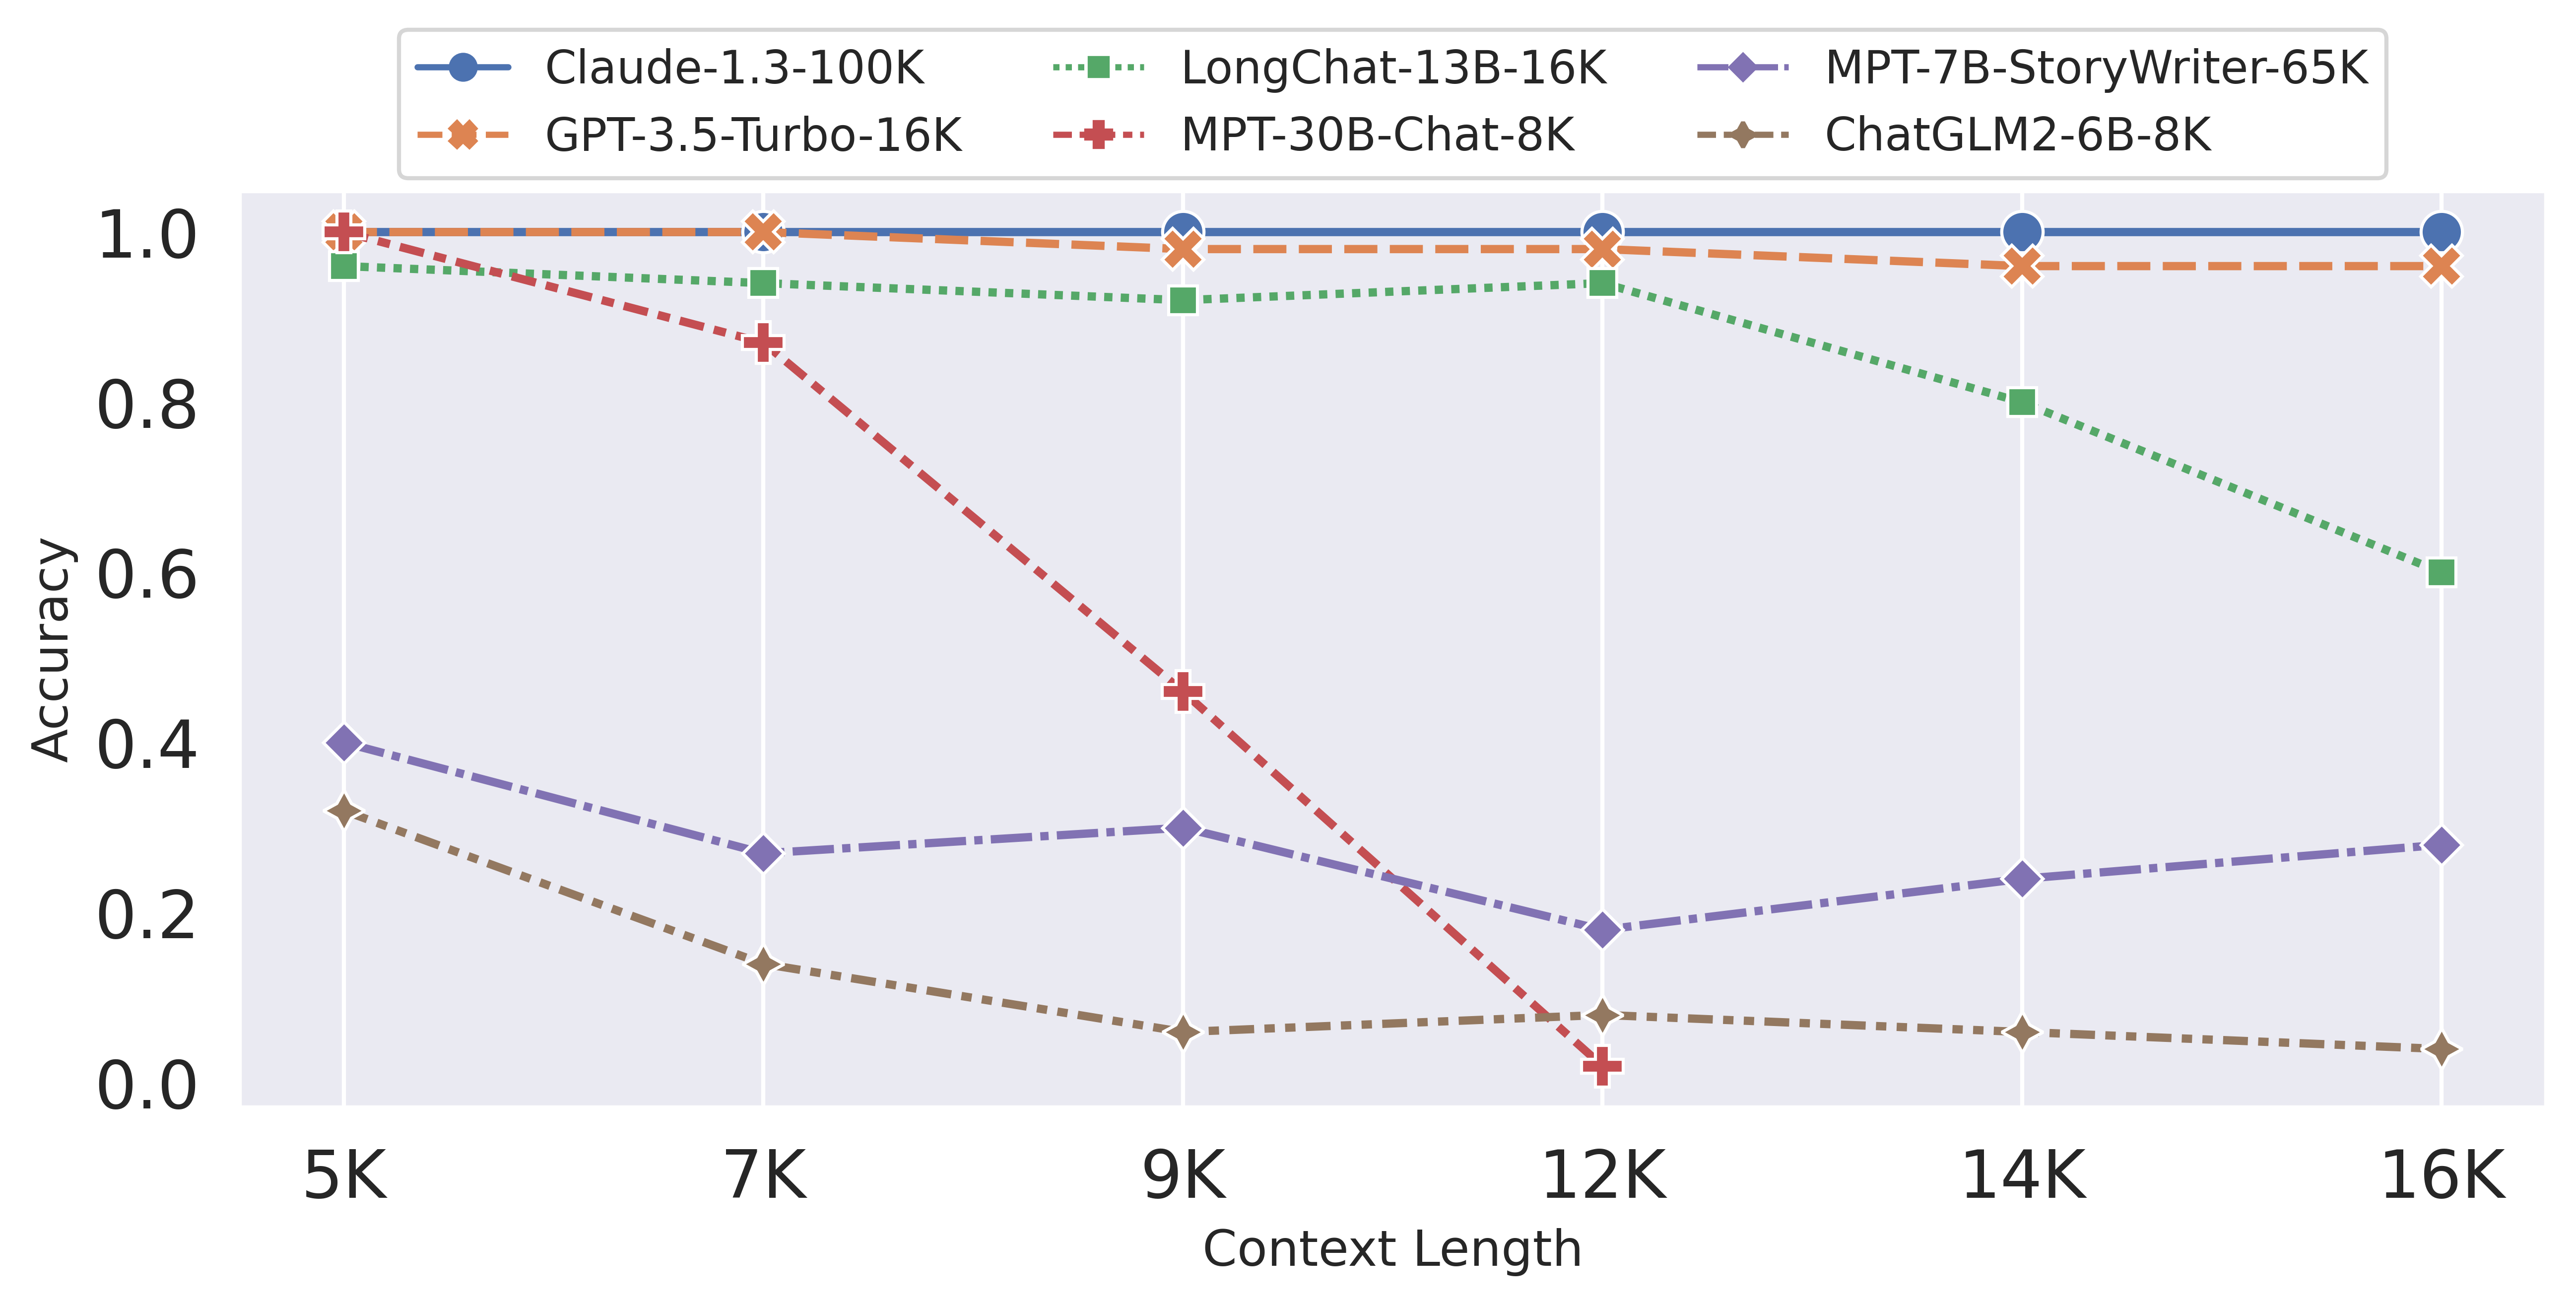 How Long Can Open-Source LLMs Truly Promise on Context Length?